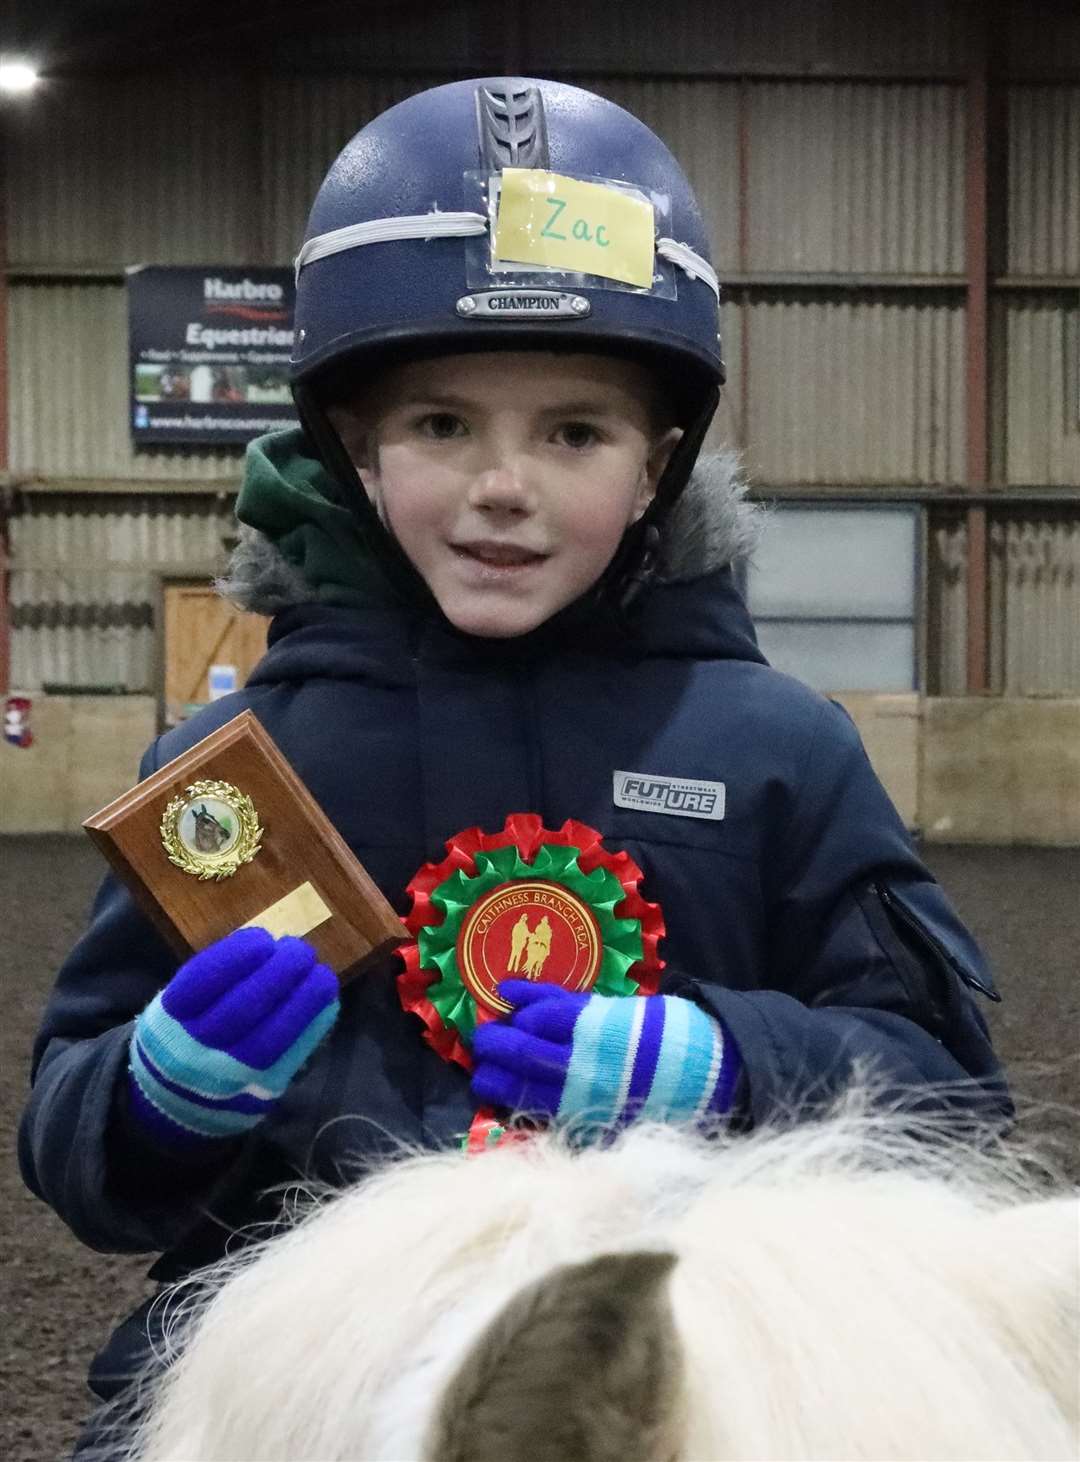 Zac Bain from Ride 1 with his shield for effort and Christmas rosette. Picture: Neil Buchan